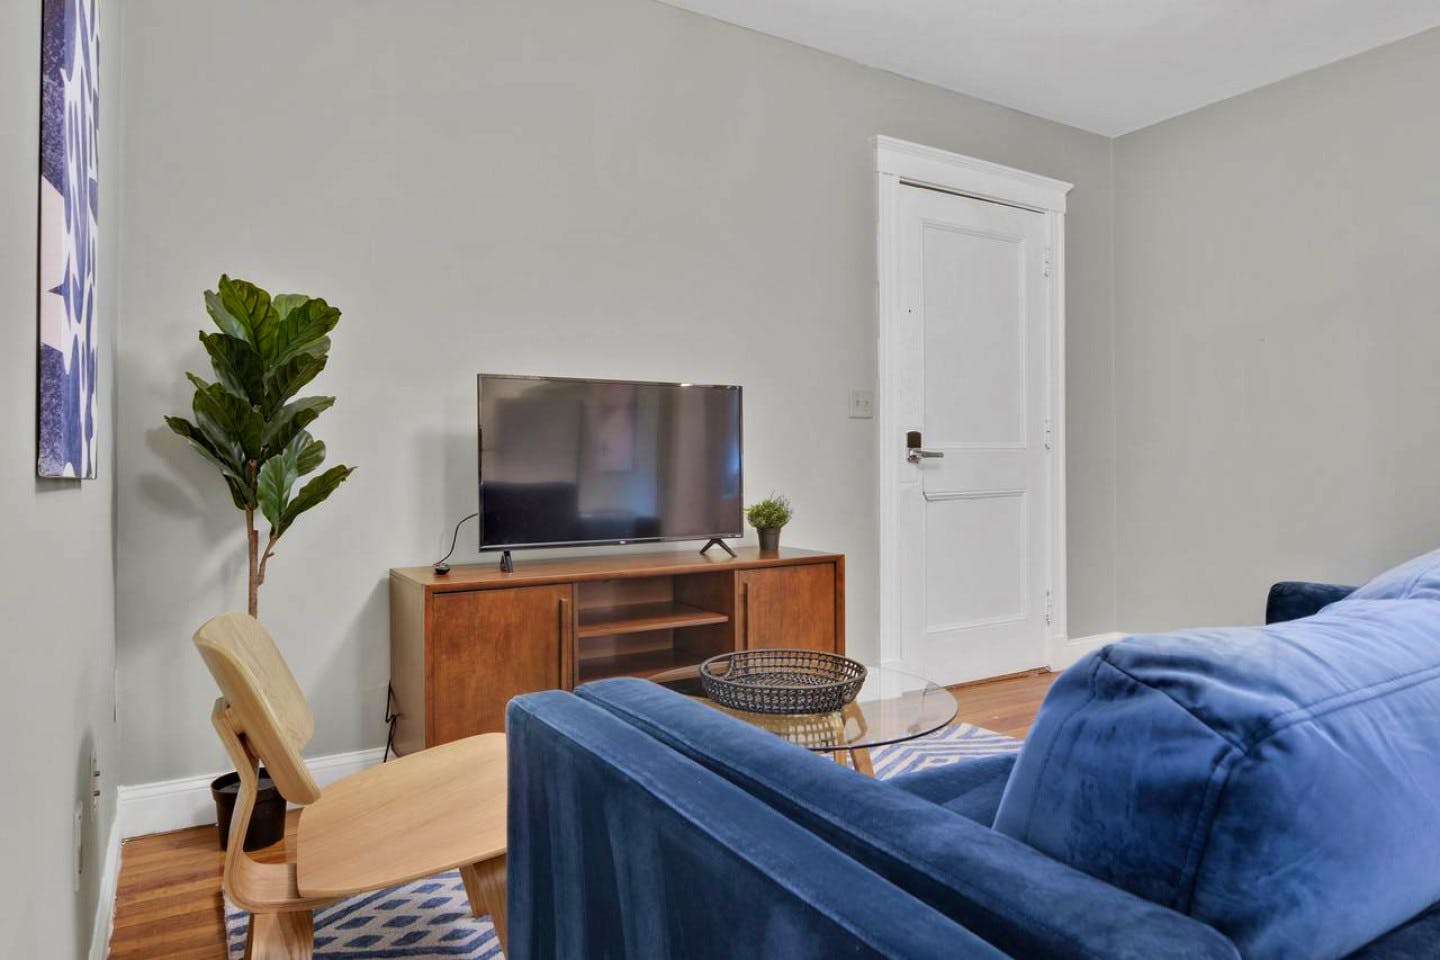 Cozy Chic Apt. 1 mile away from Chestnut Hill Reservation